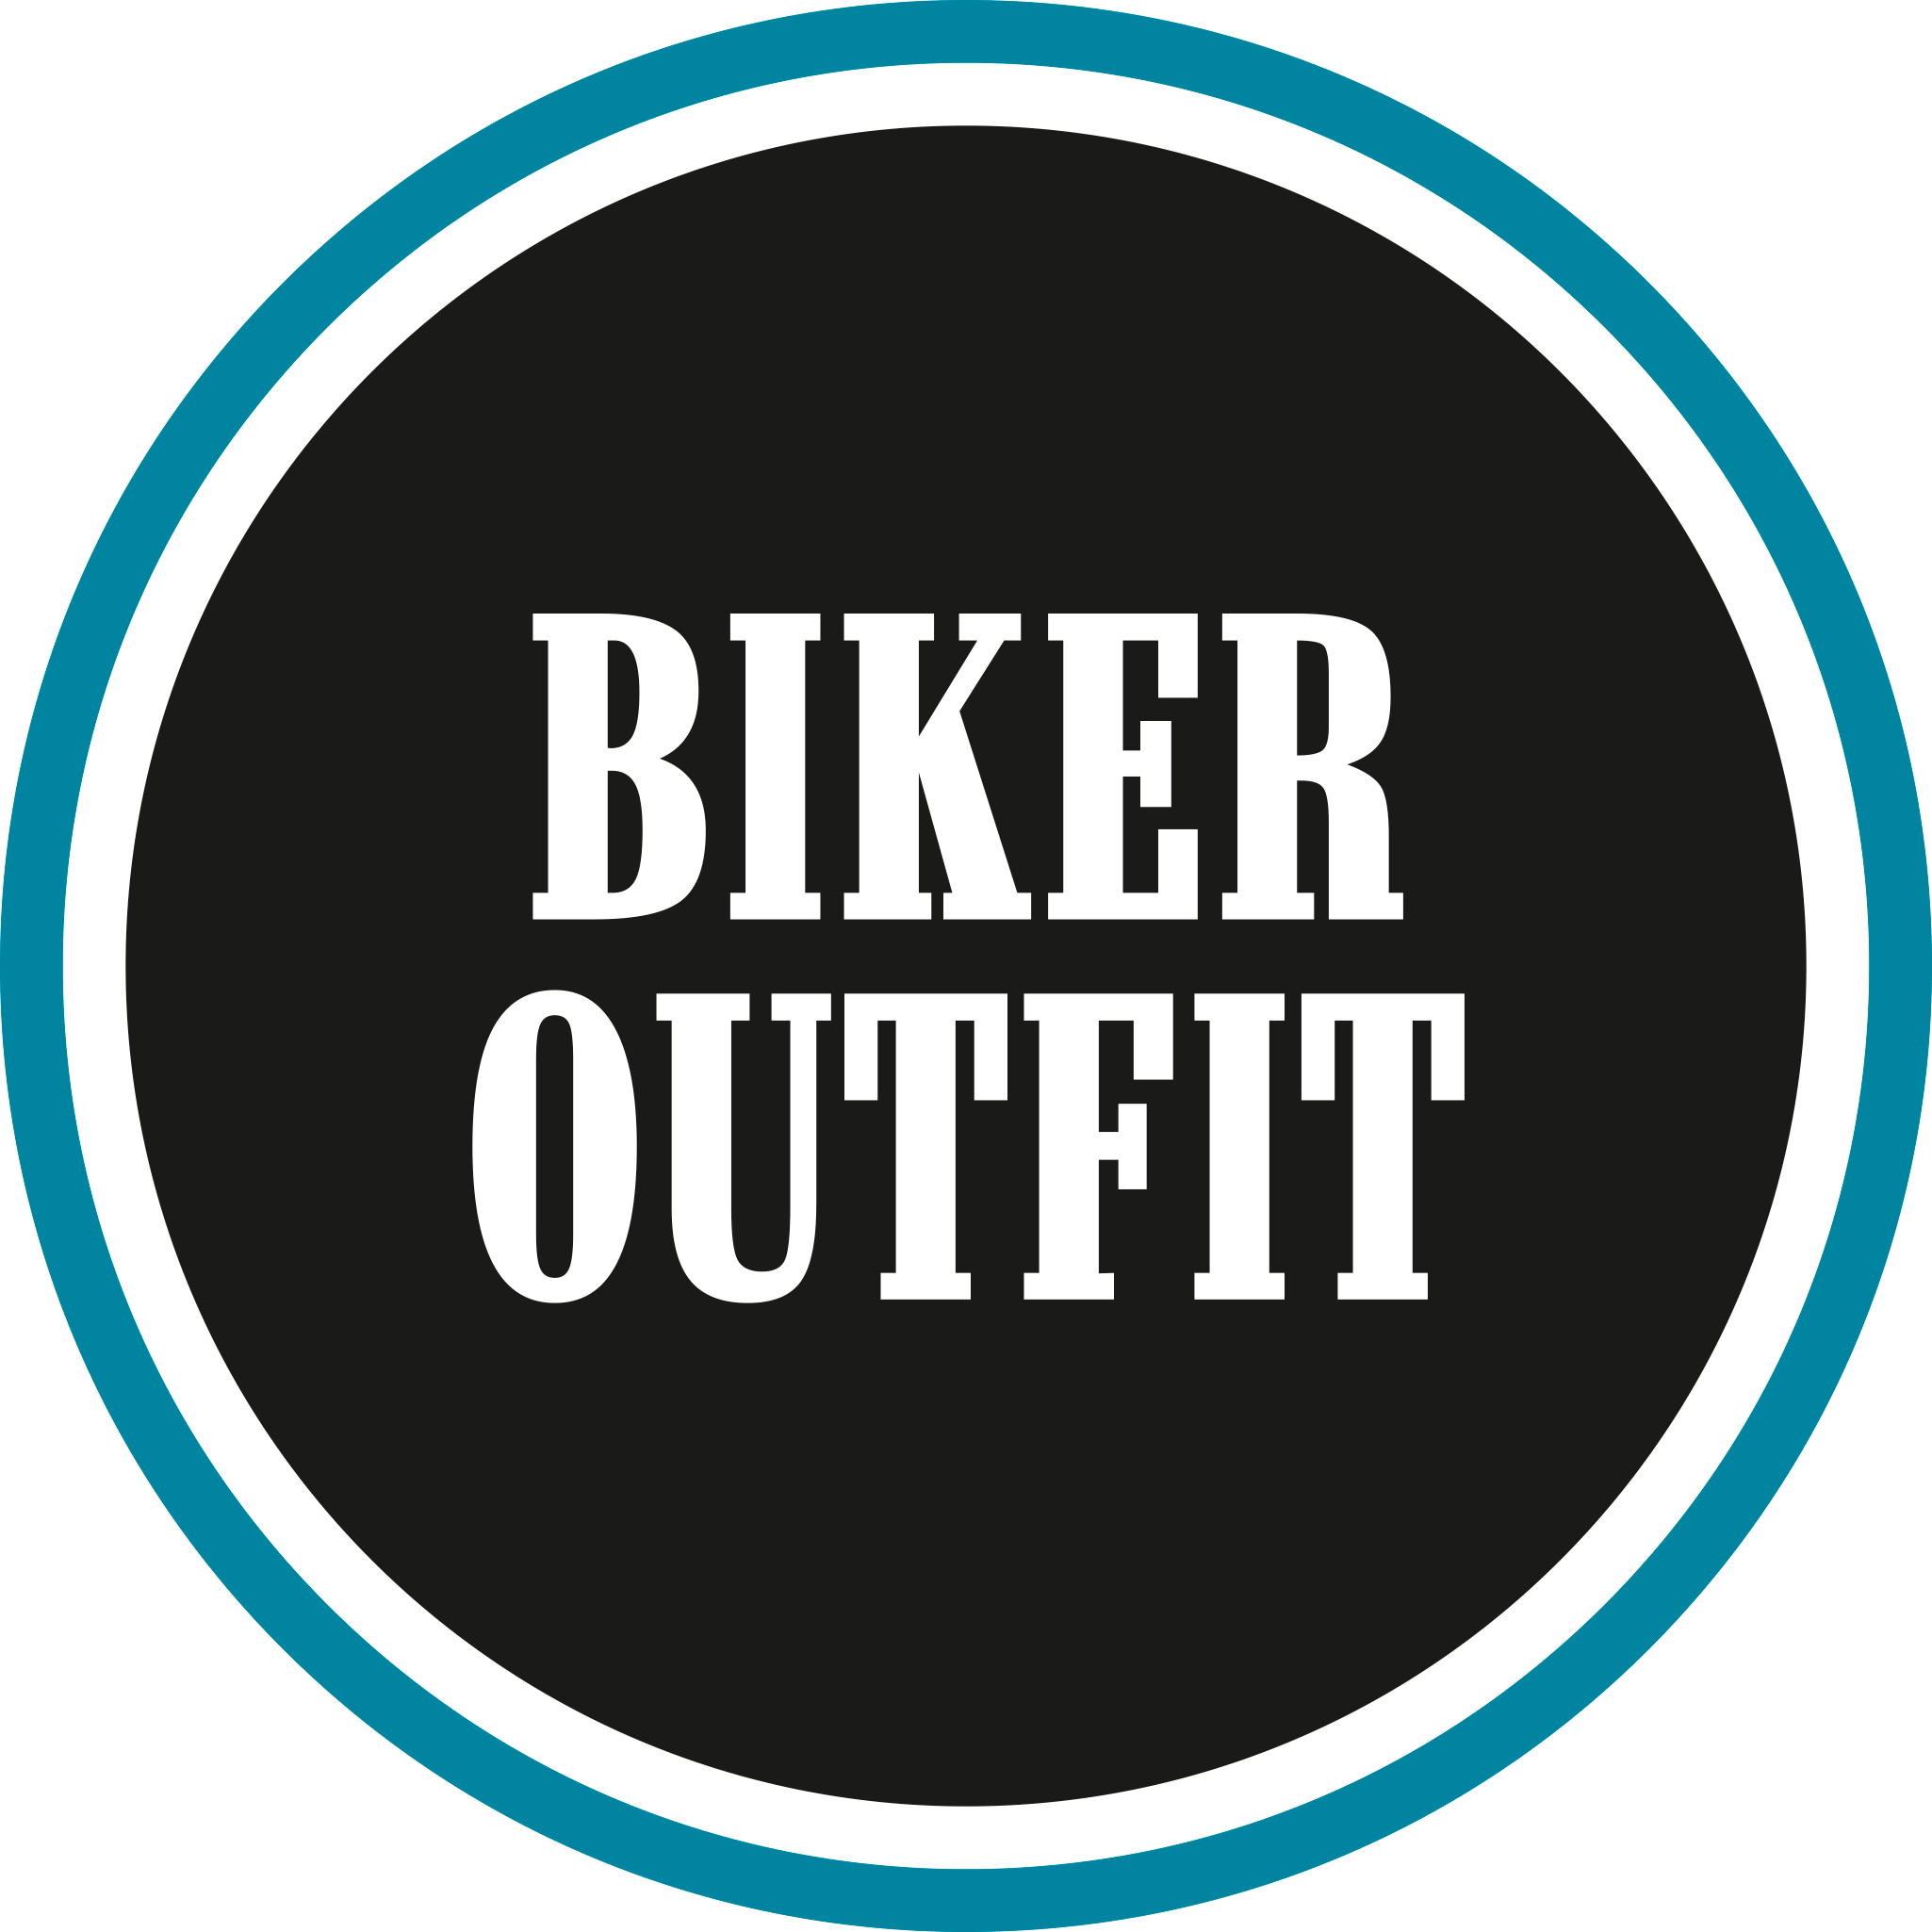 Motorcycle gear - All top brand available - Biker Outfit